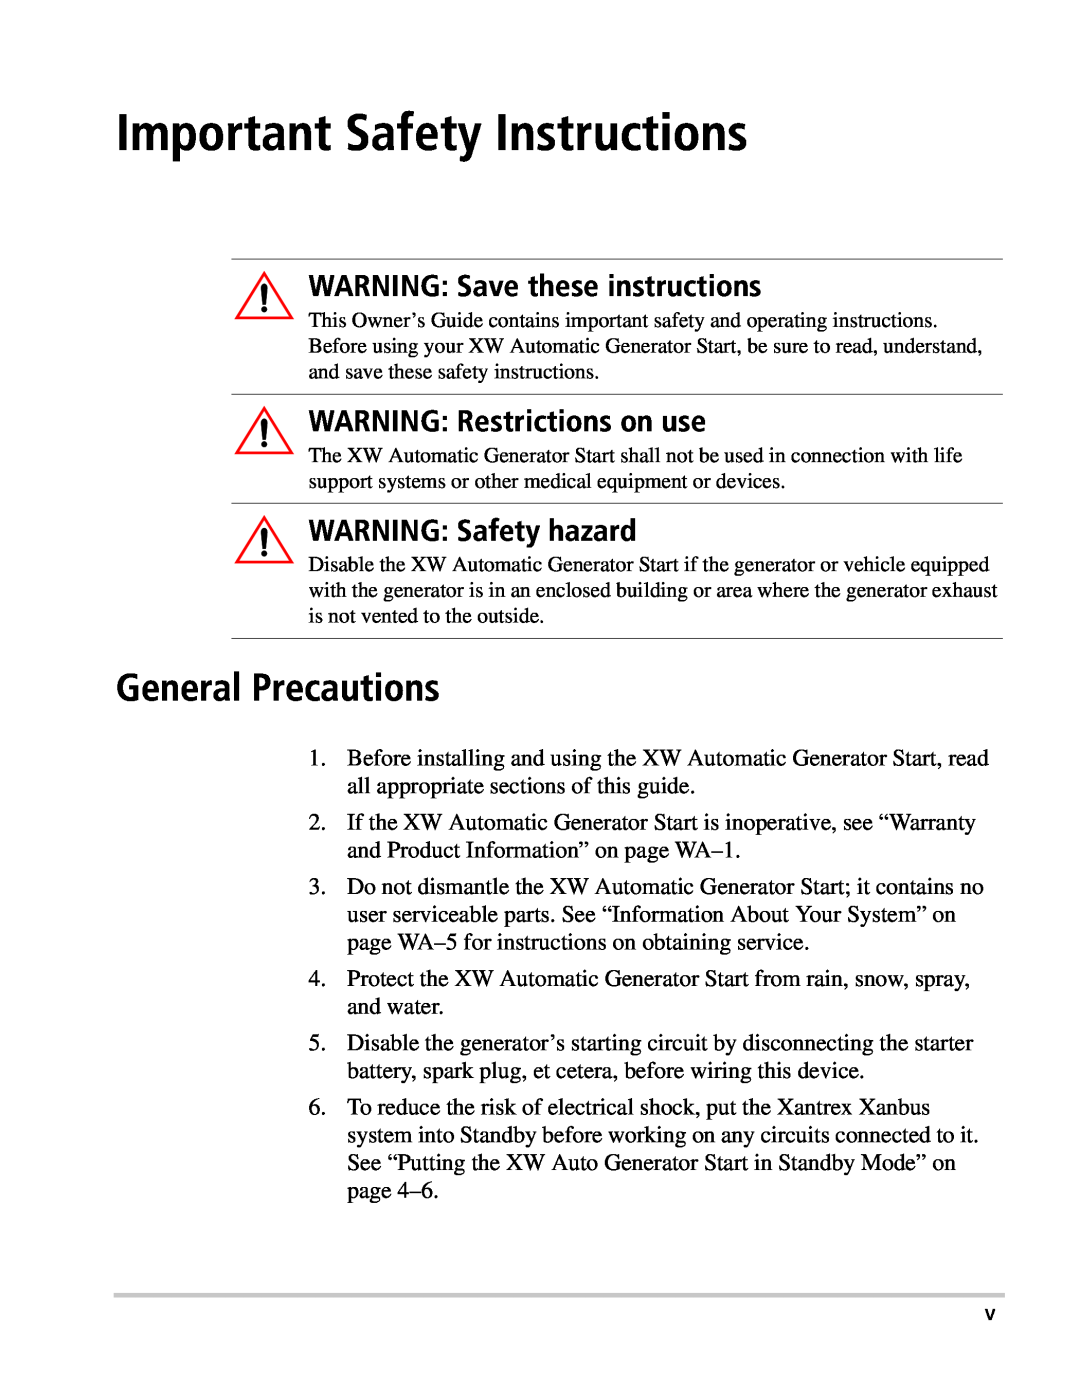 Xantrex Technology XW manual Important Safety Instructions, General Precautions, WARNING Save these instructions 